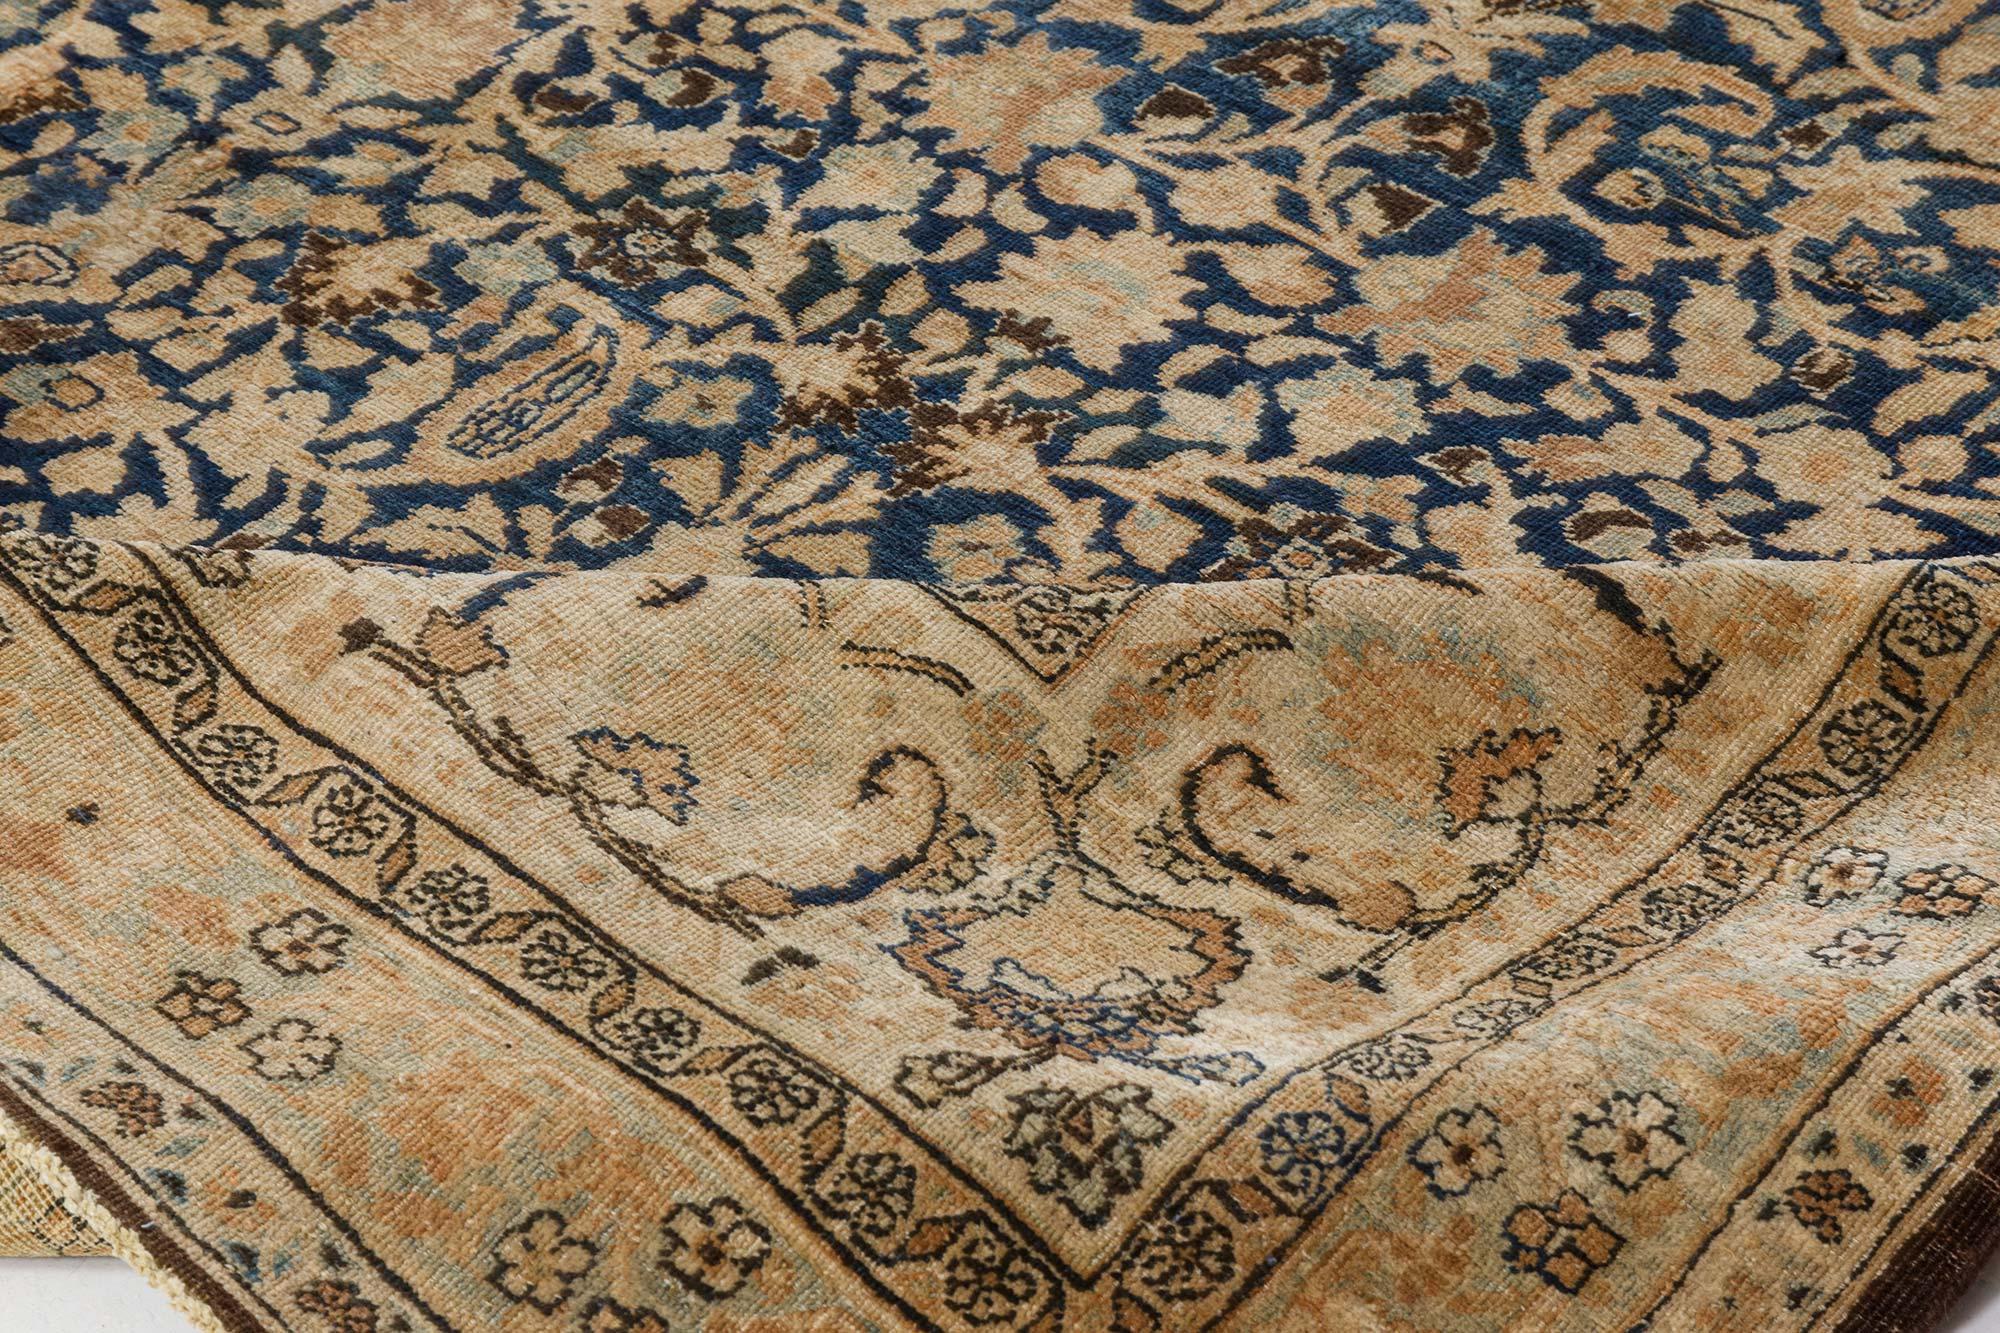 Antique Persian Meshad rug in beige, blue and brown
Size: 9'1